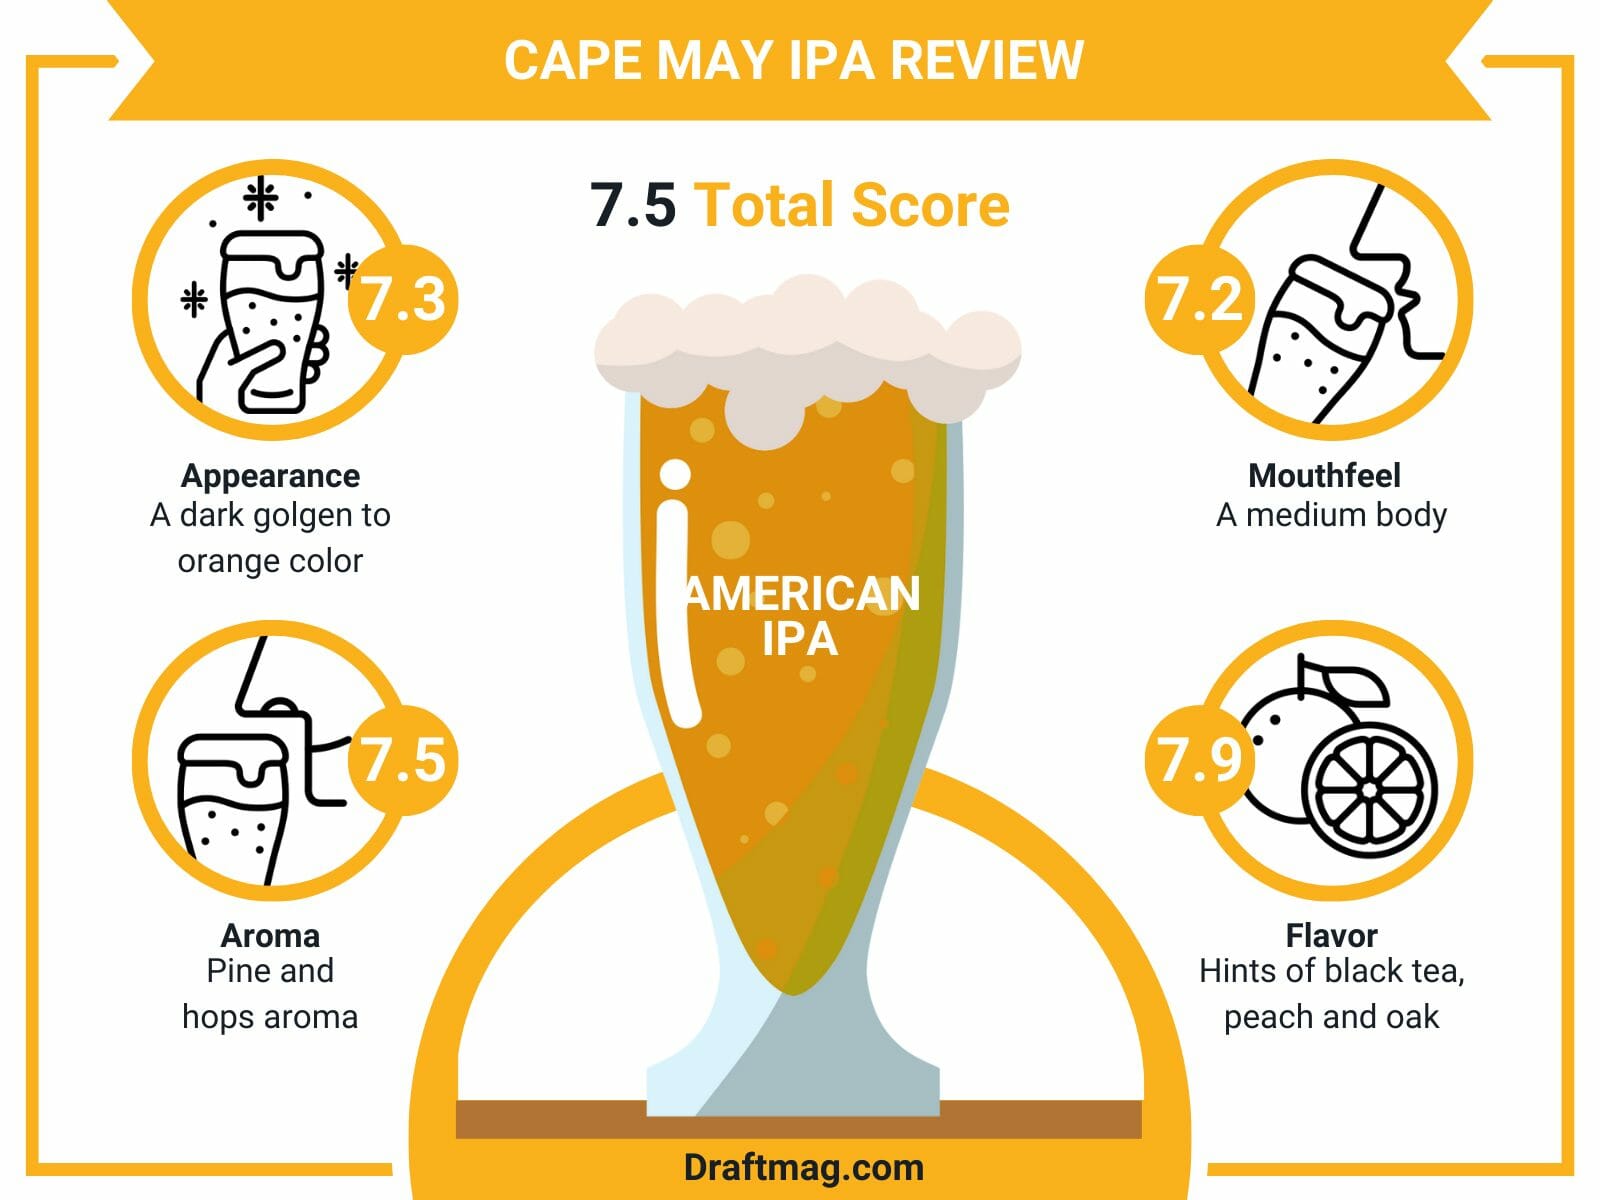 Cape may ipa review infographic